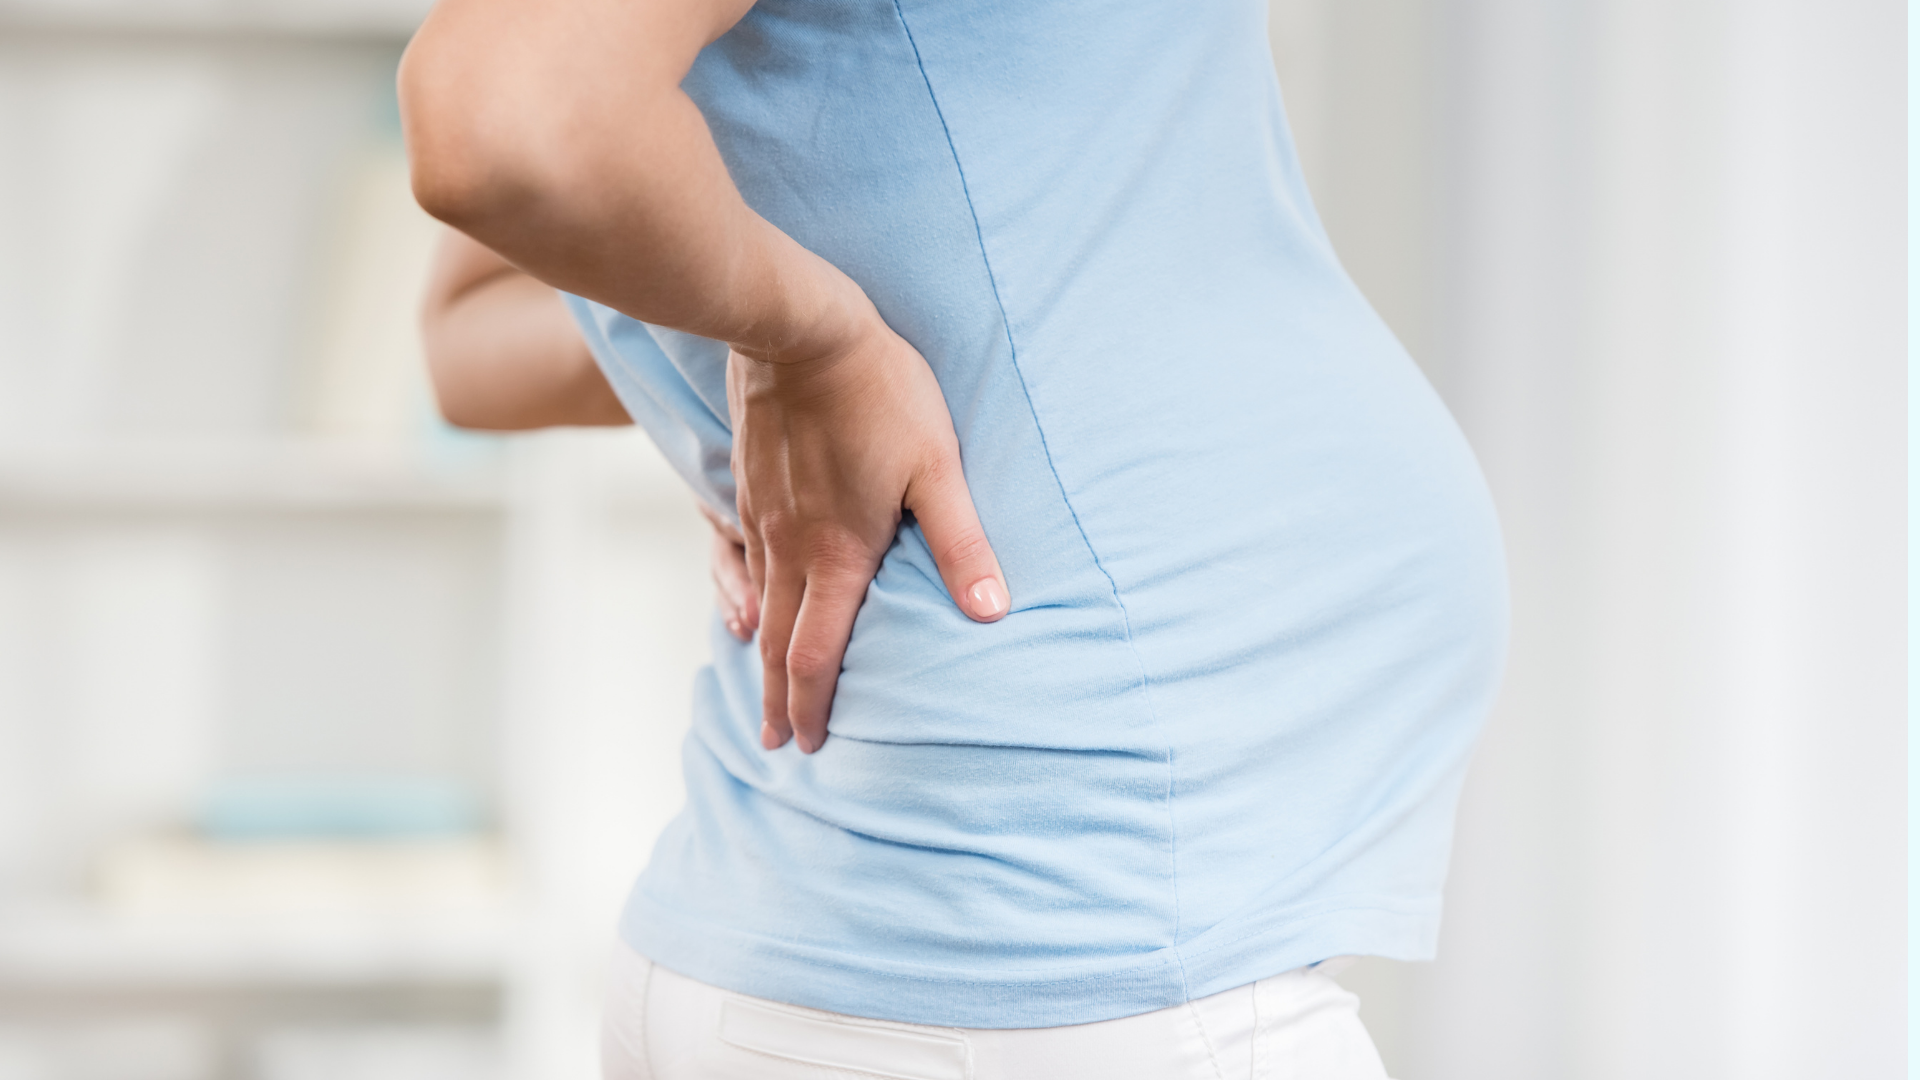 tips to help relieve lower back pain